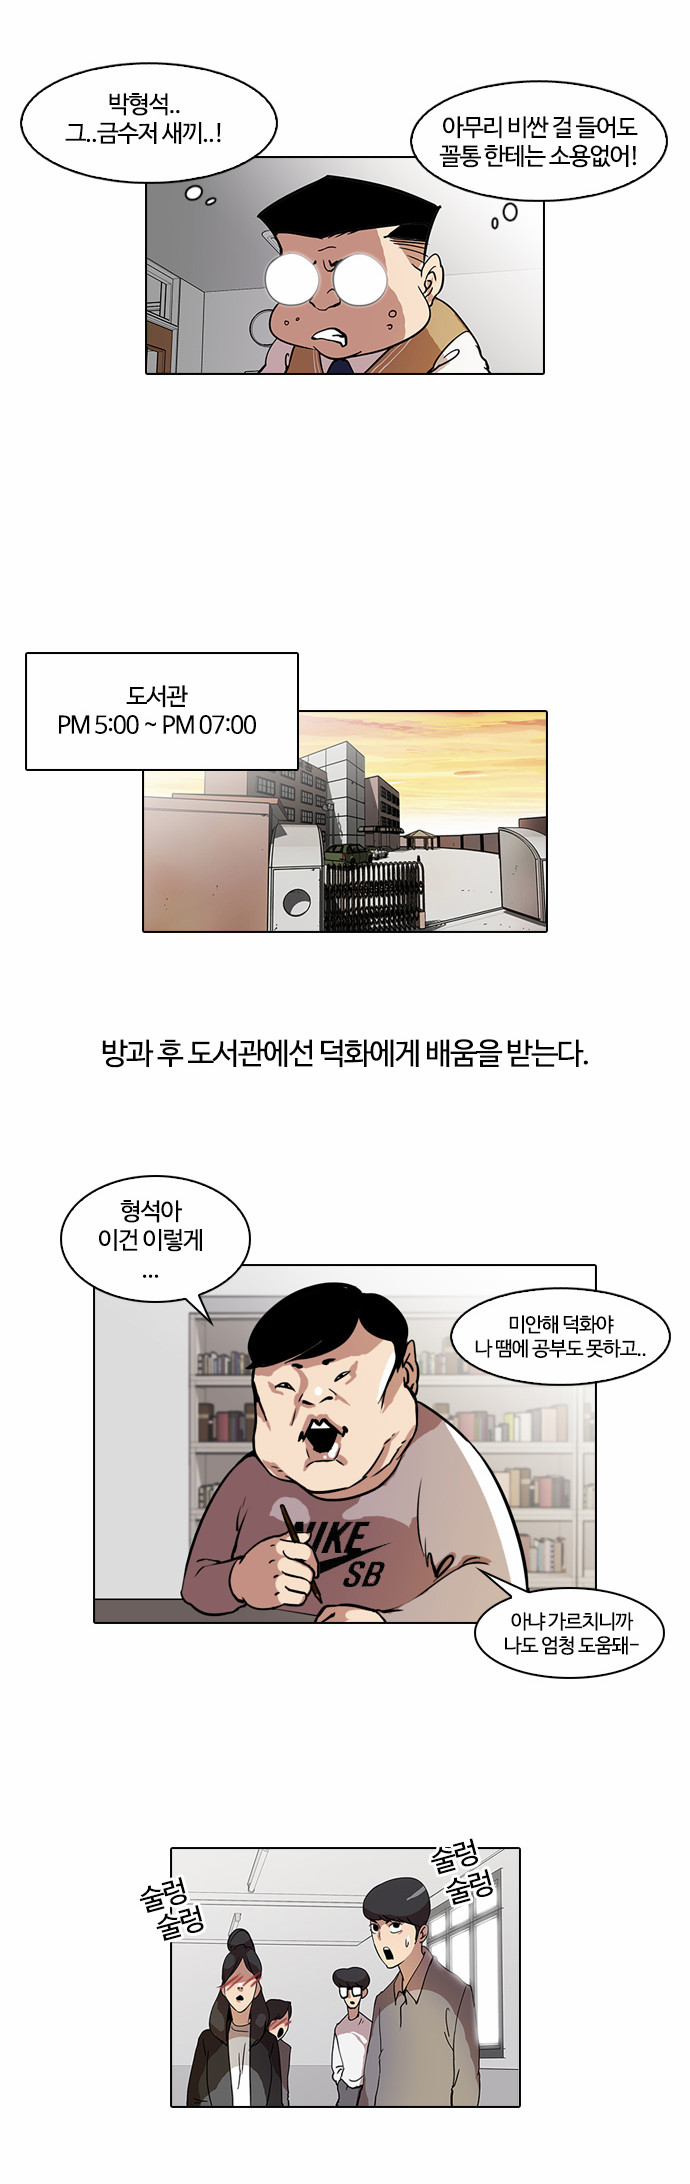 Lookism - Chapter 40 - Page 3